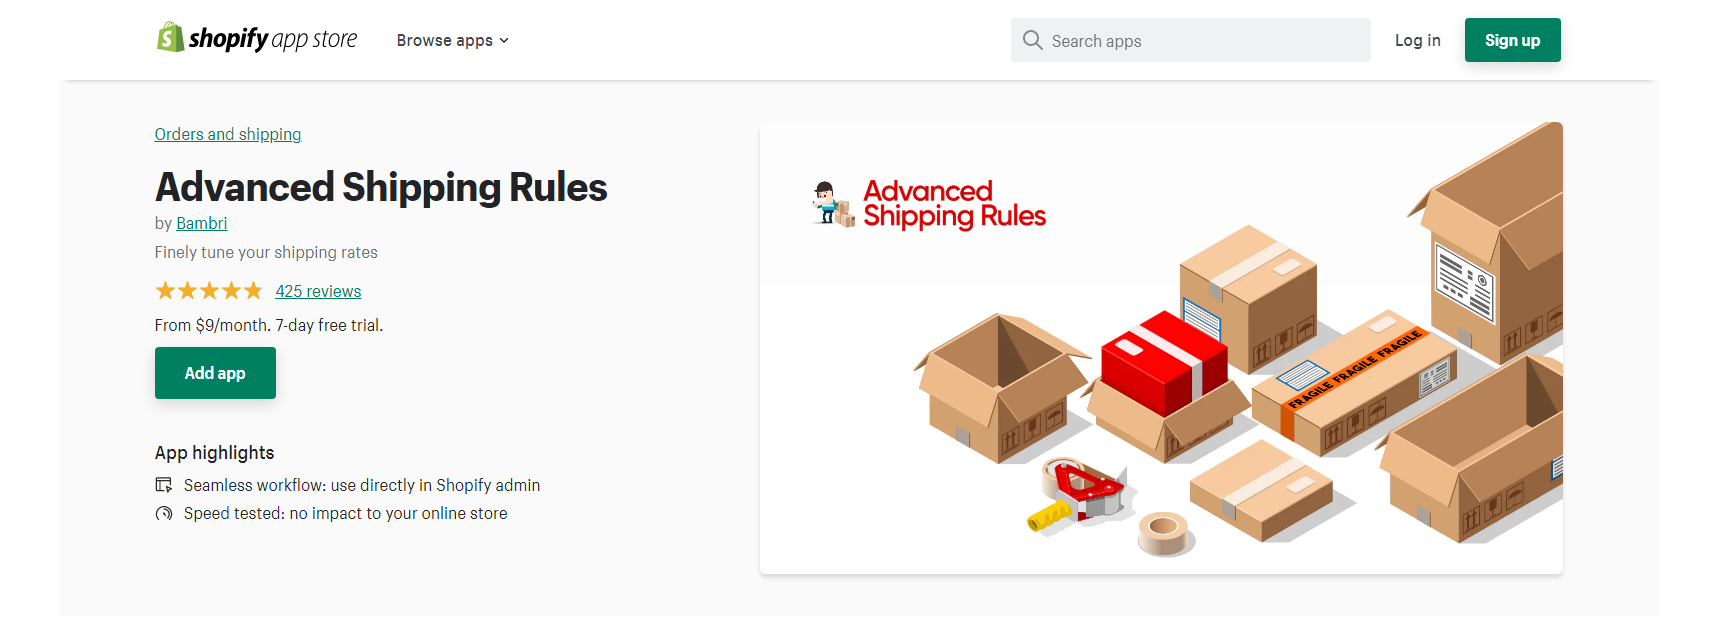 Advanced Shipping Rules - Shopify shipping apps